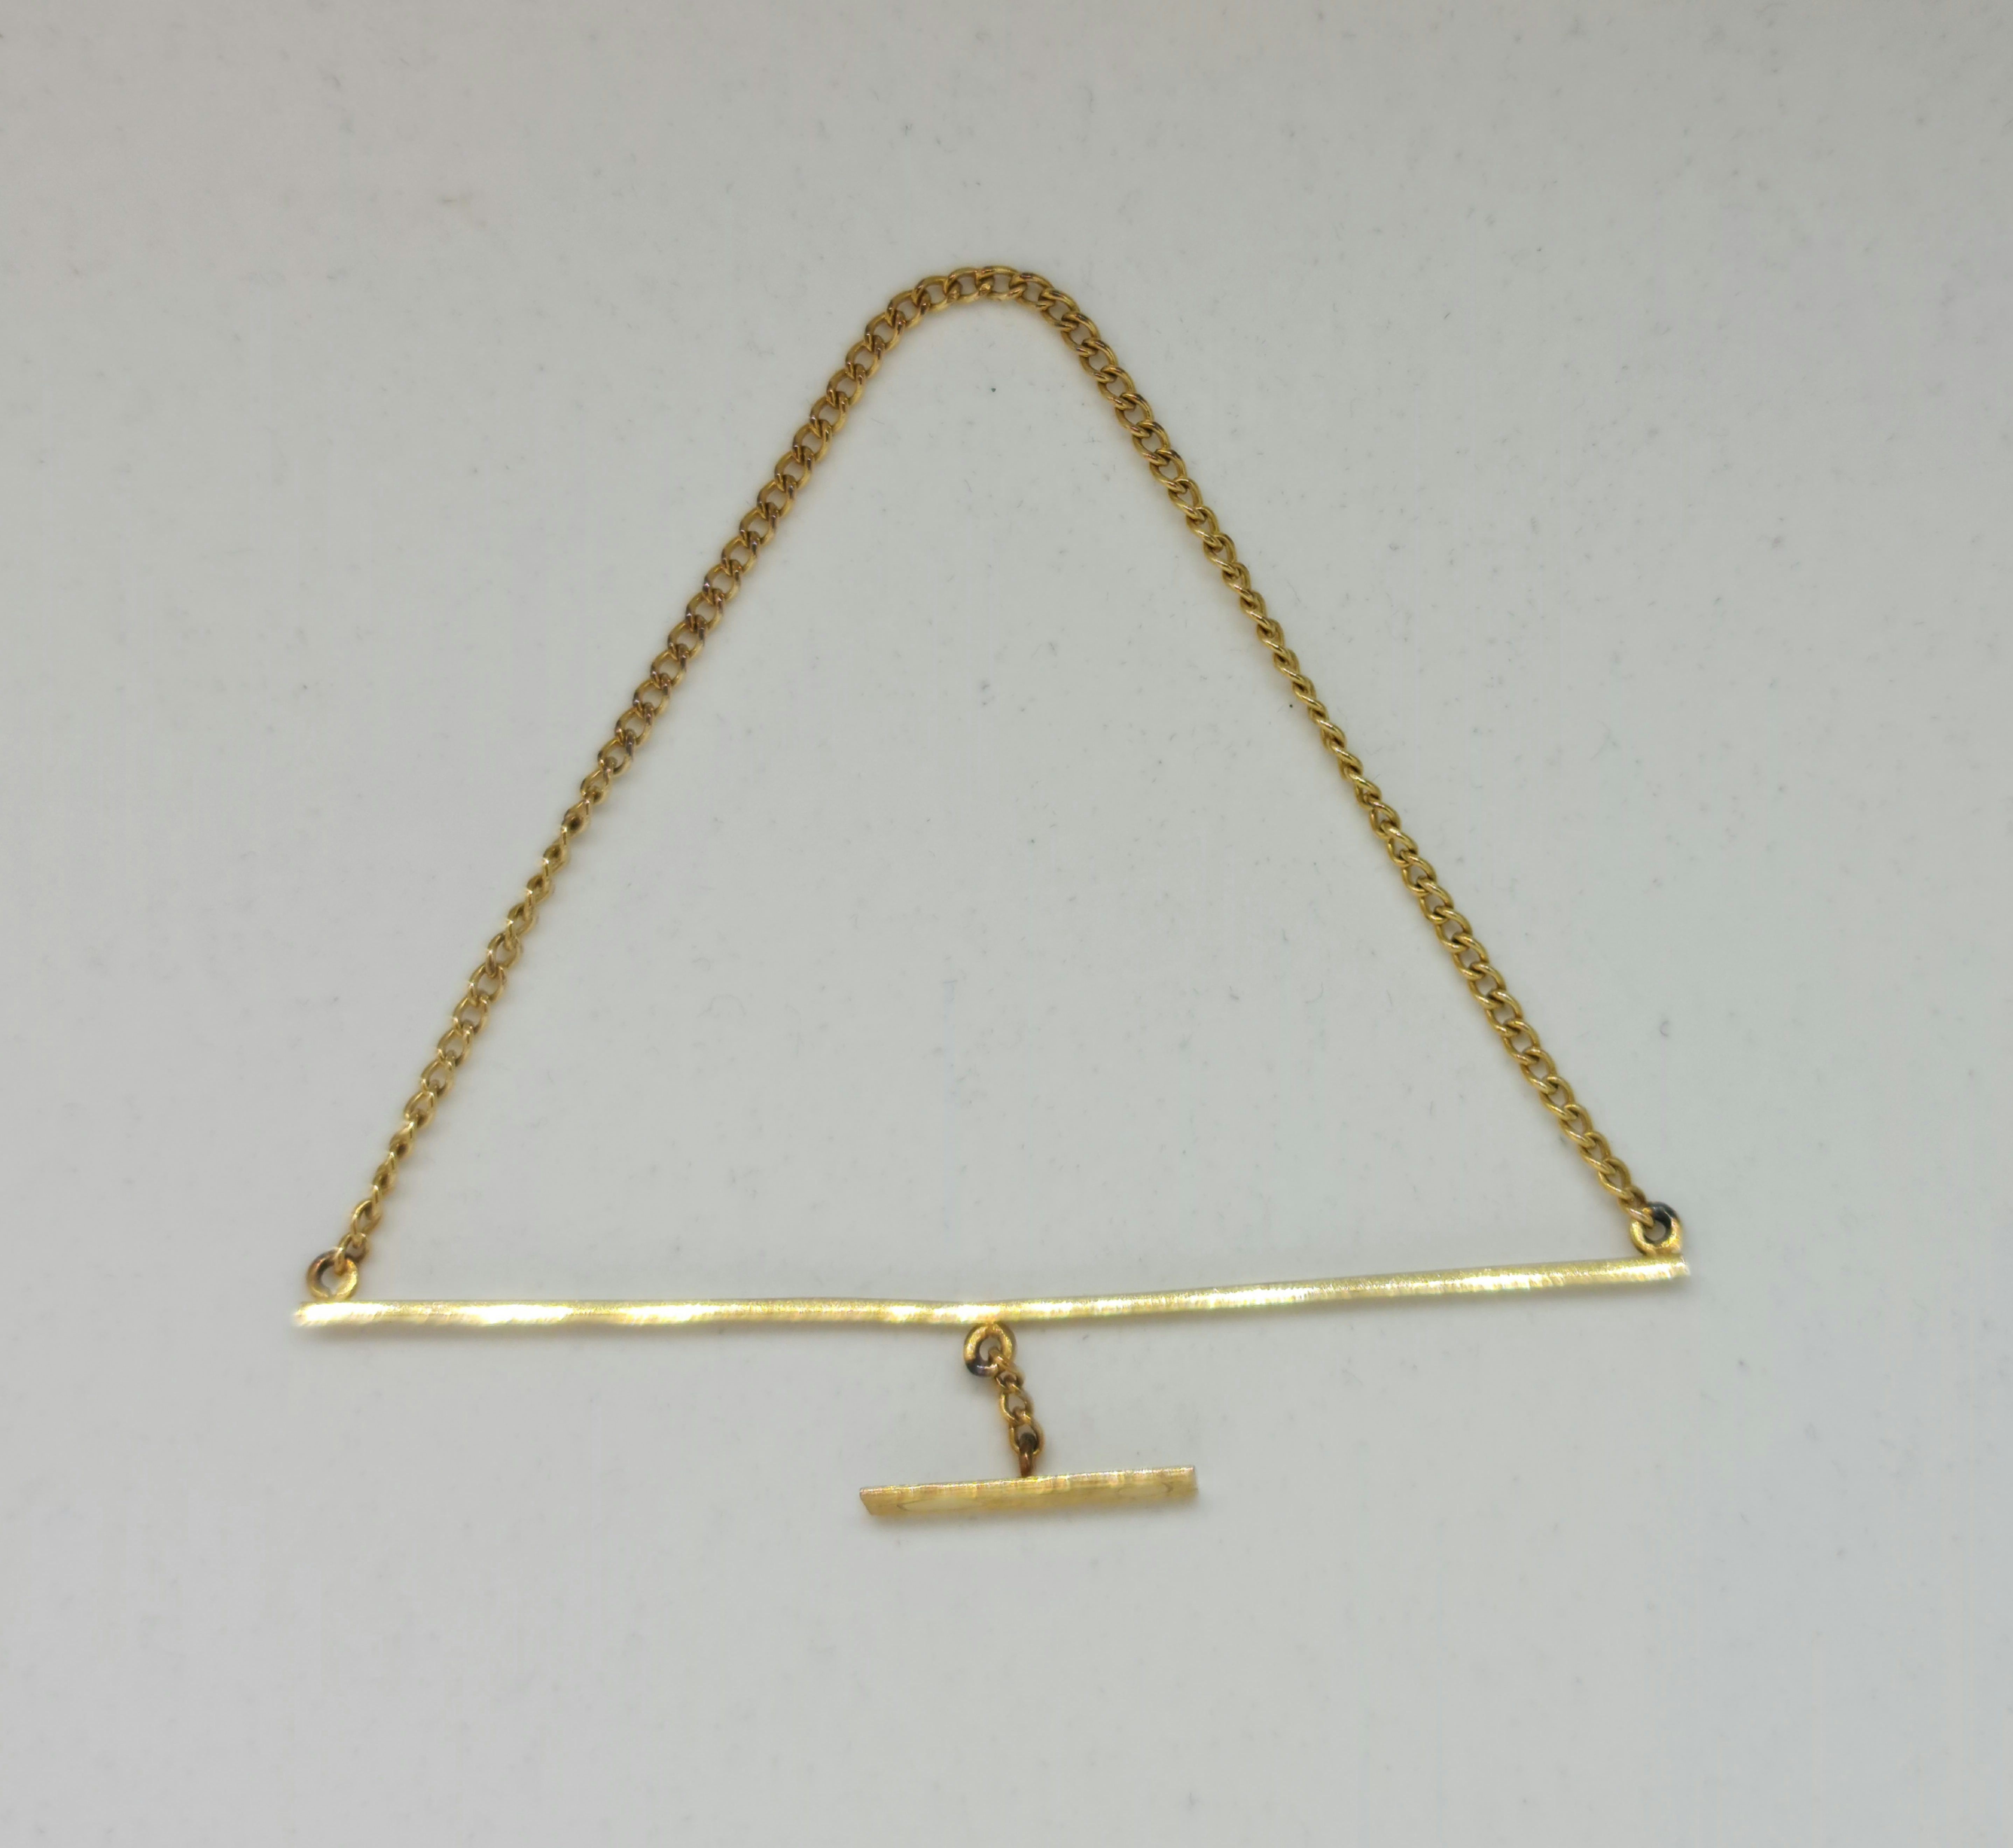 A hallmarked 9ct yellow gold bar with chain, weight approx. 3.7g. IMPORTANT: Online viewing and